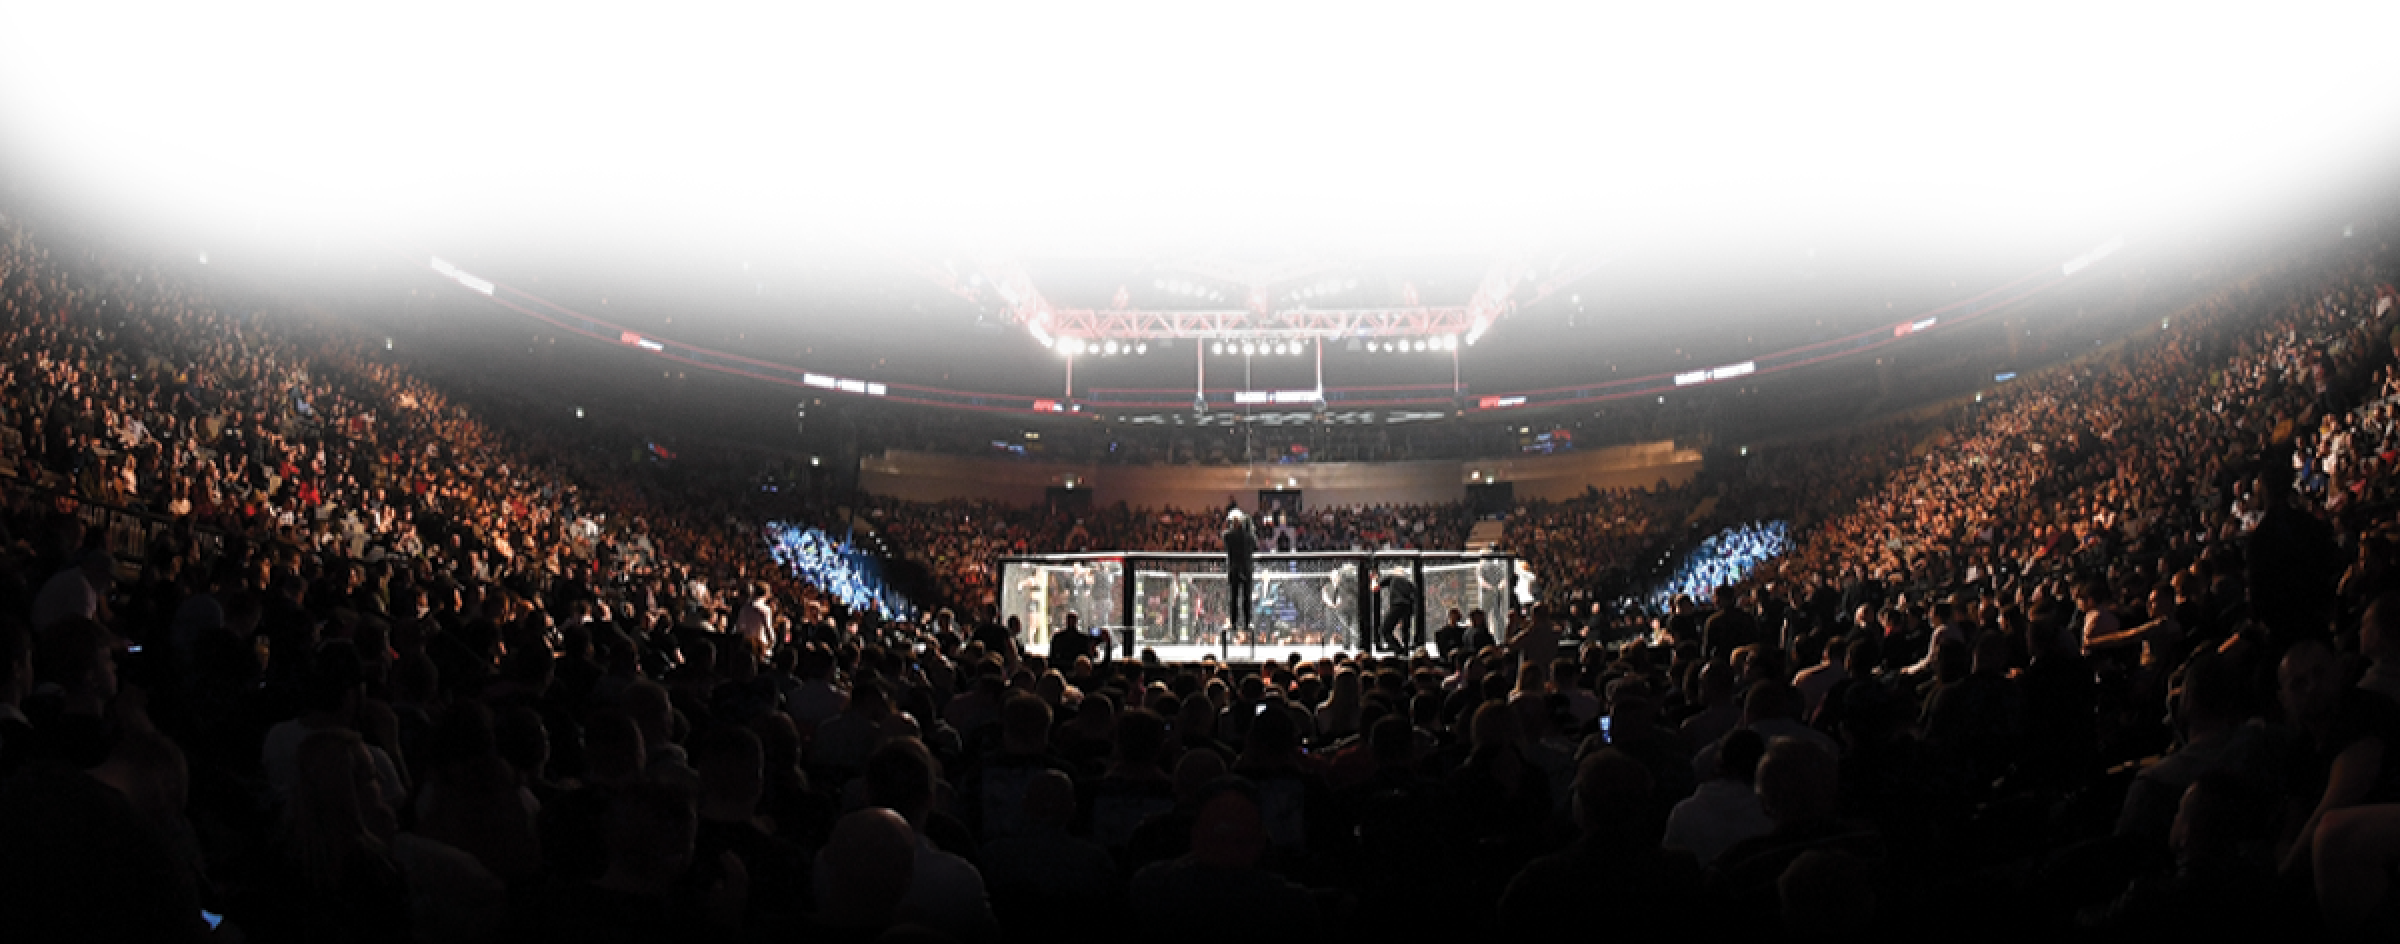 UFC Ring with crowd